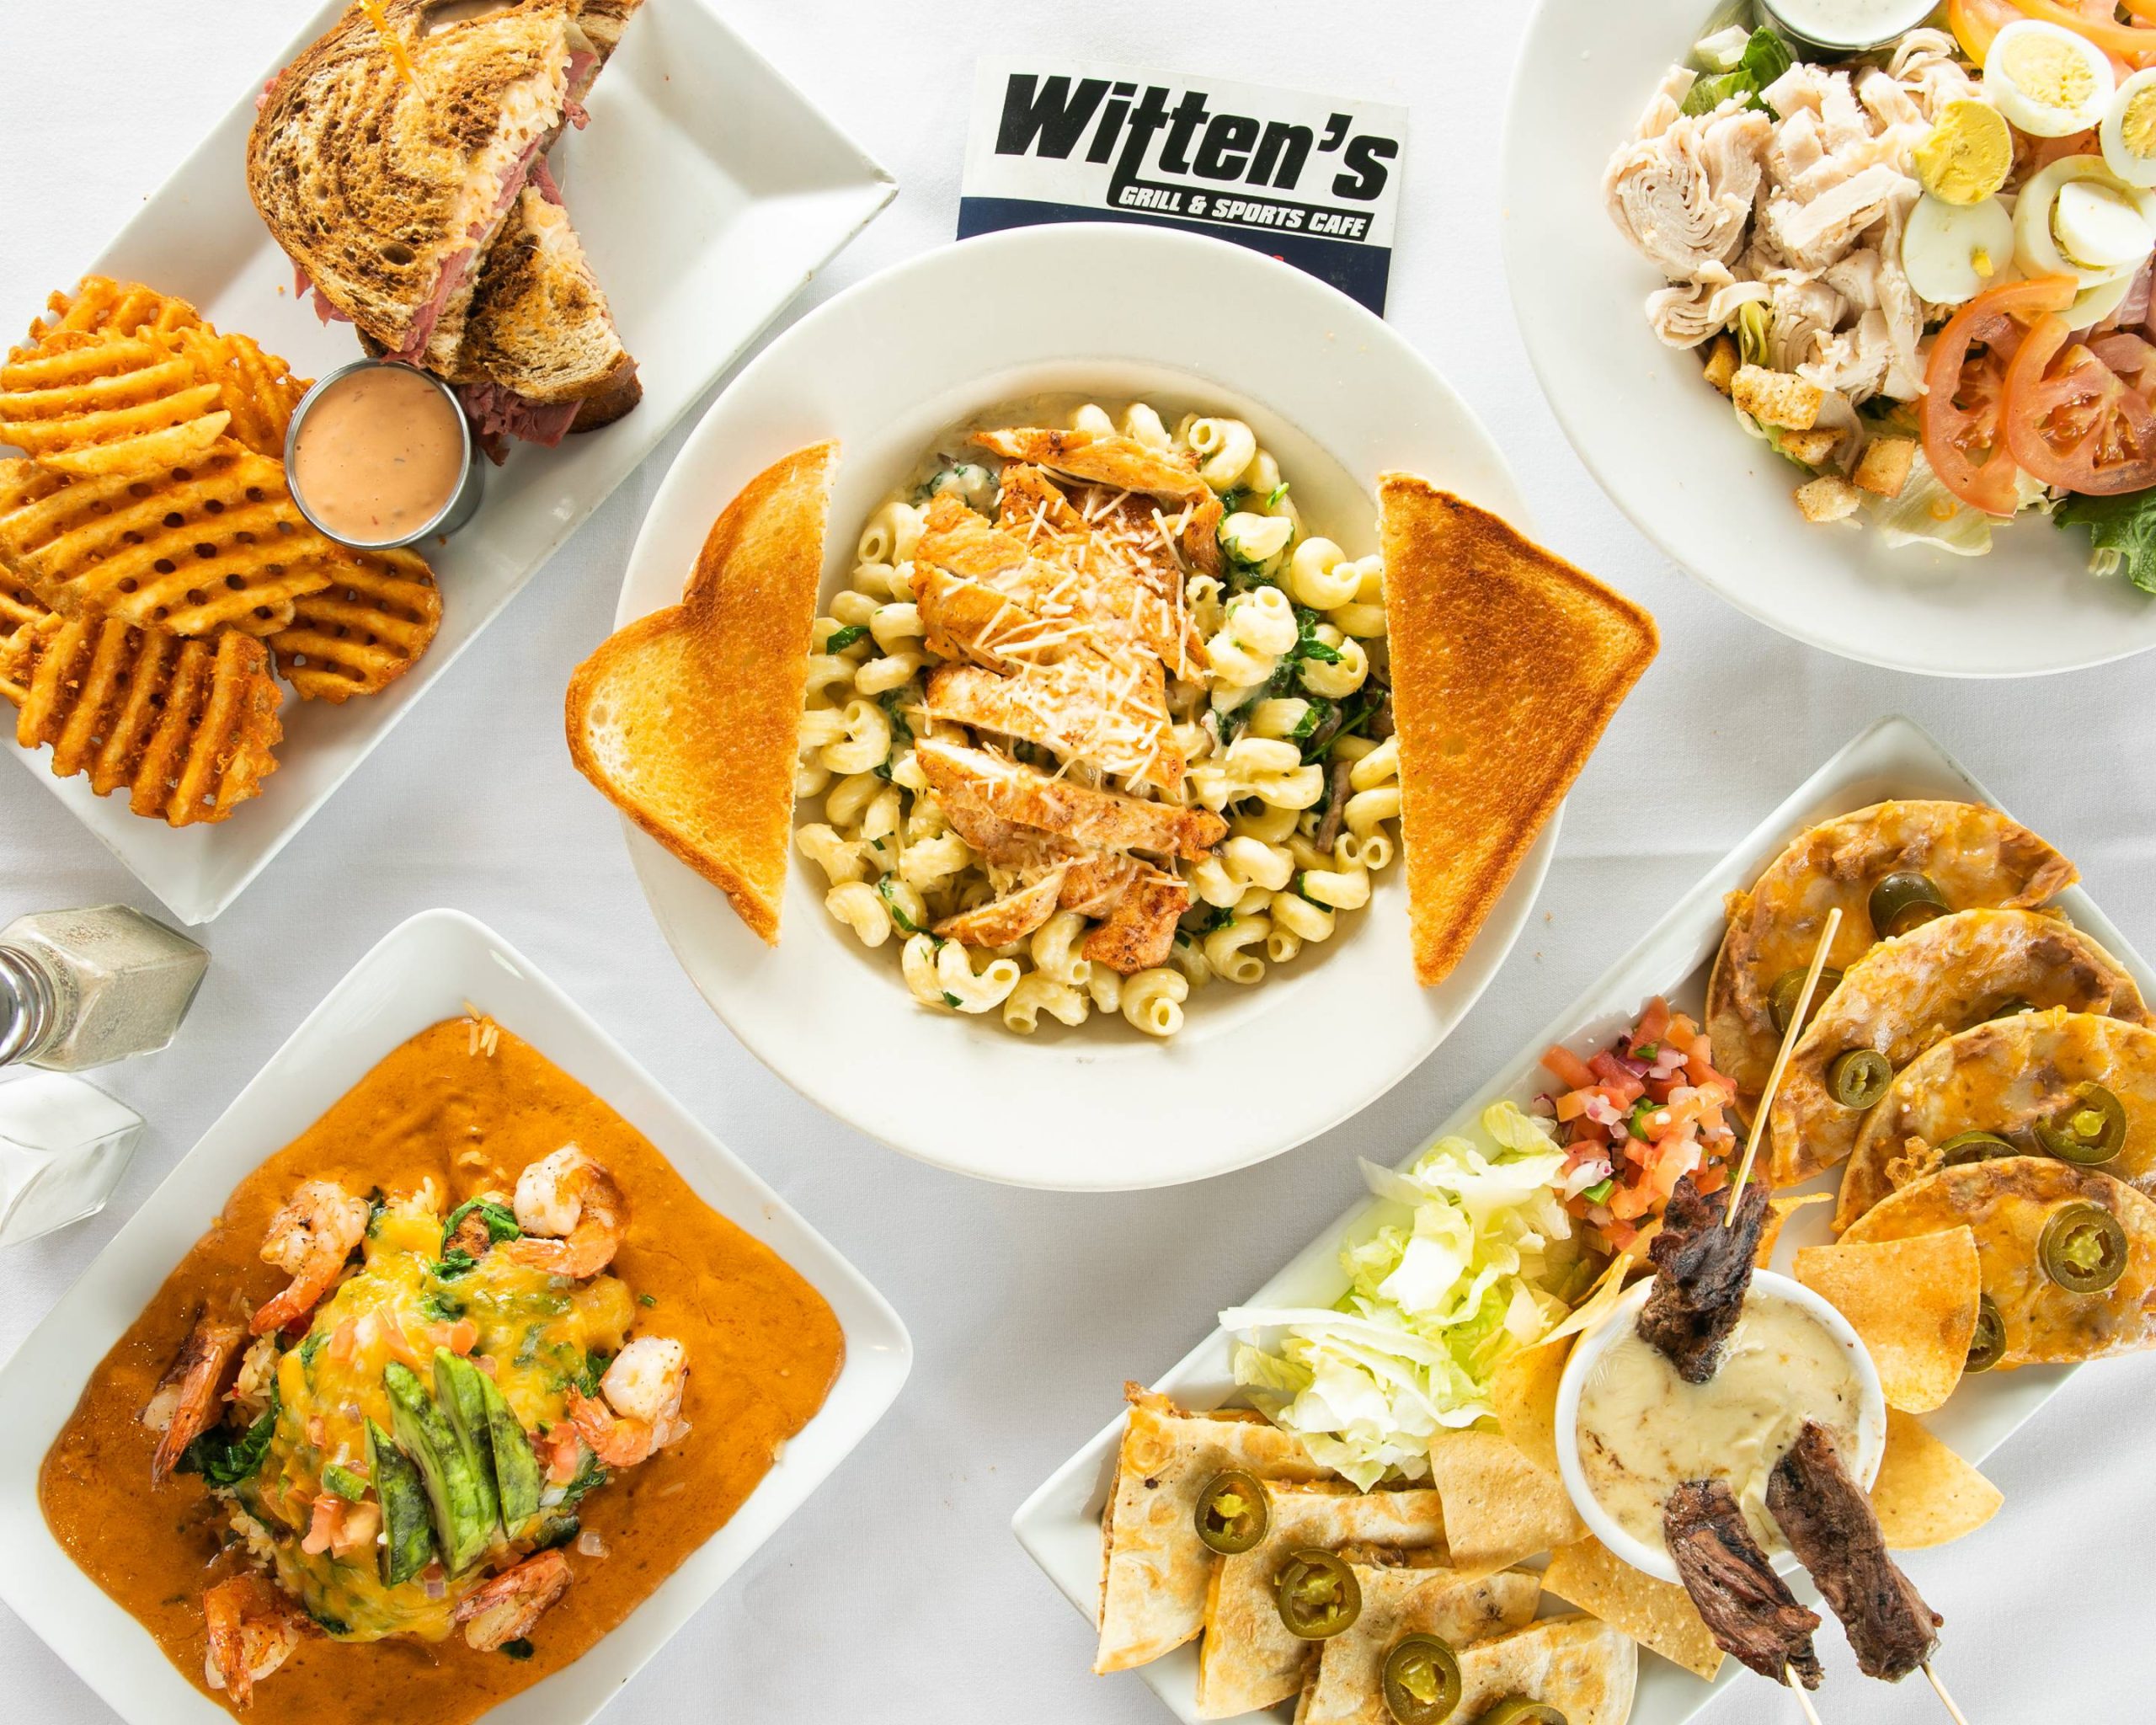 Wittens Grill and Sport Cafe